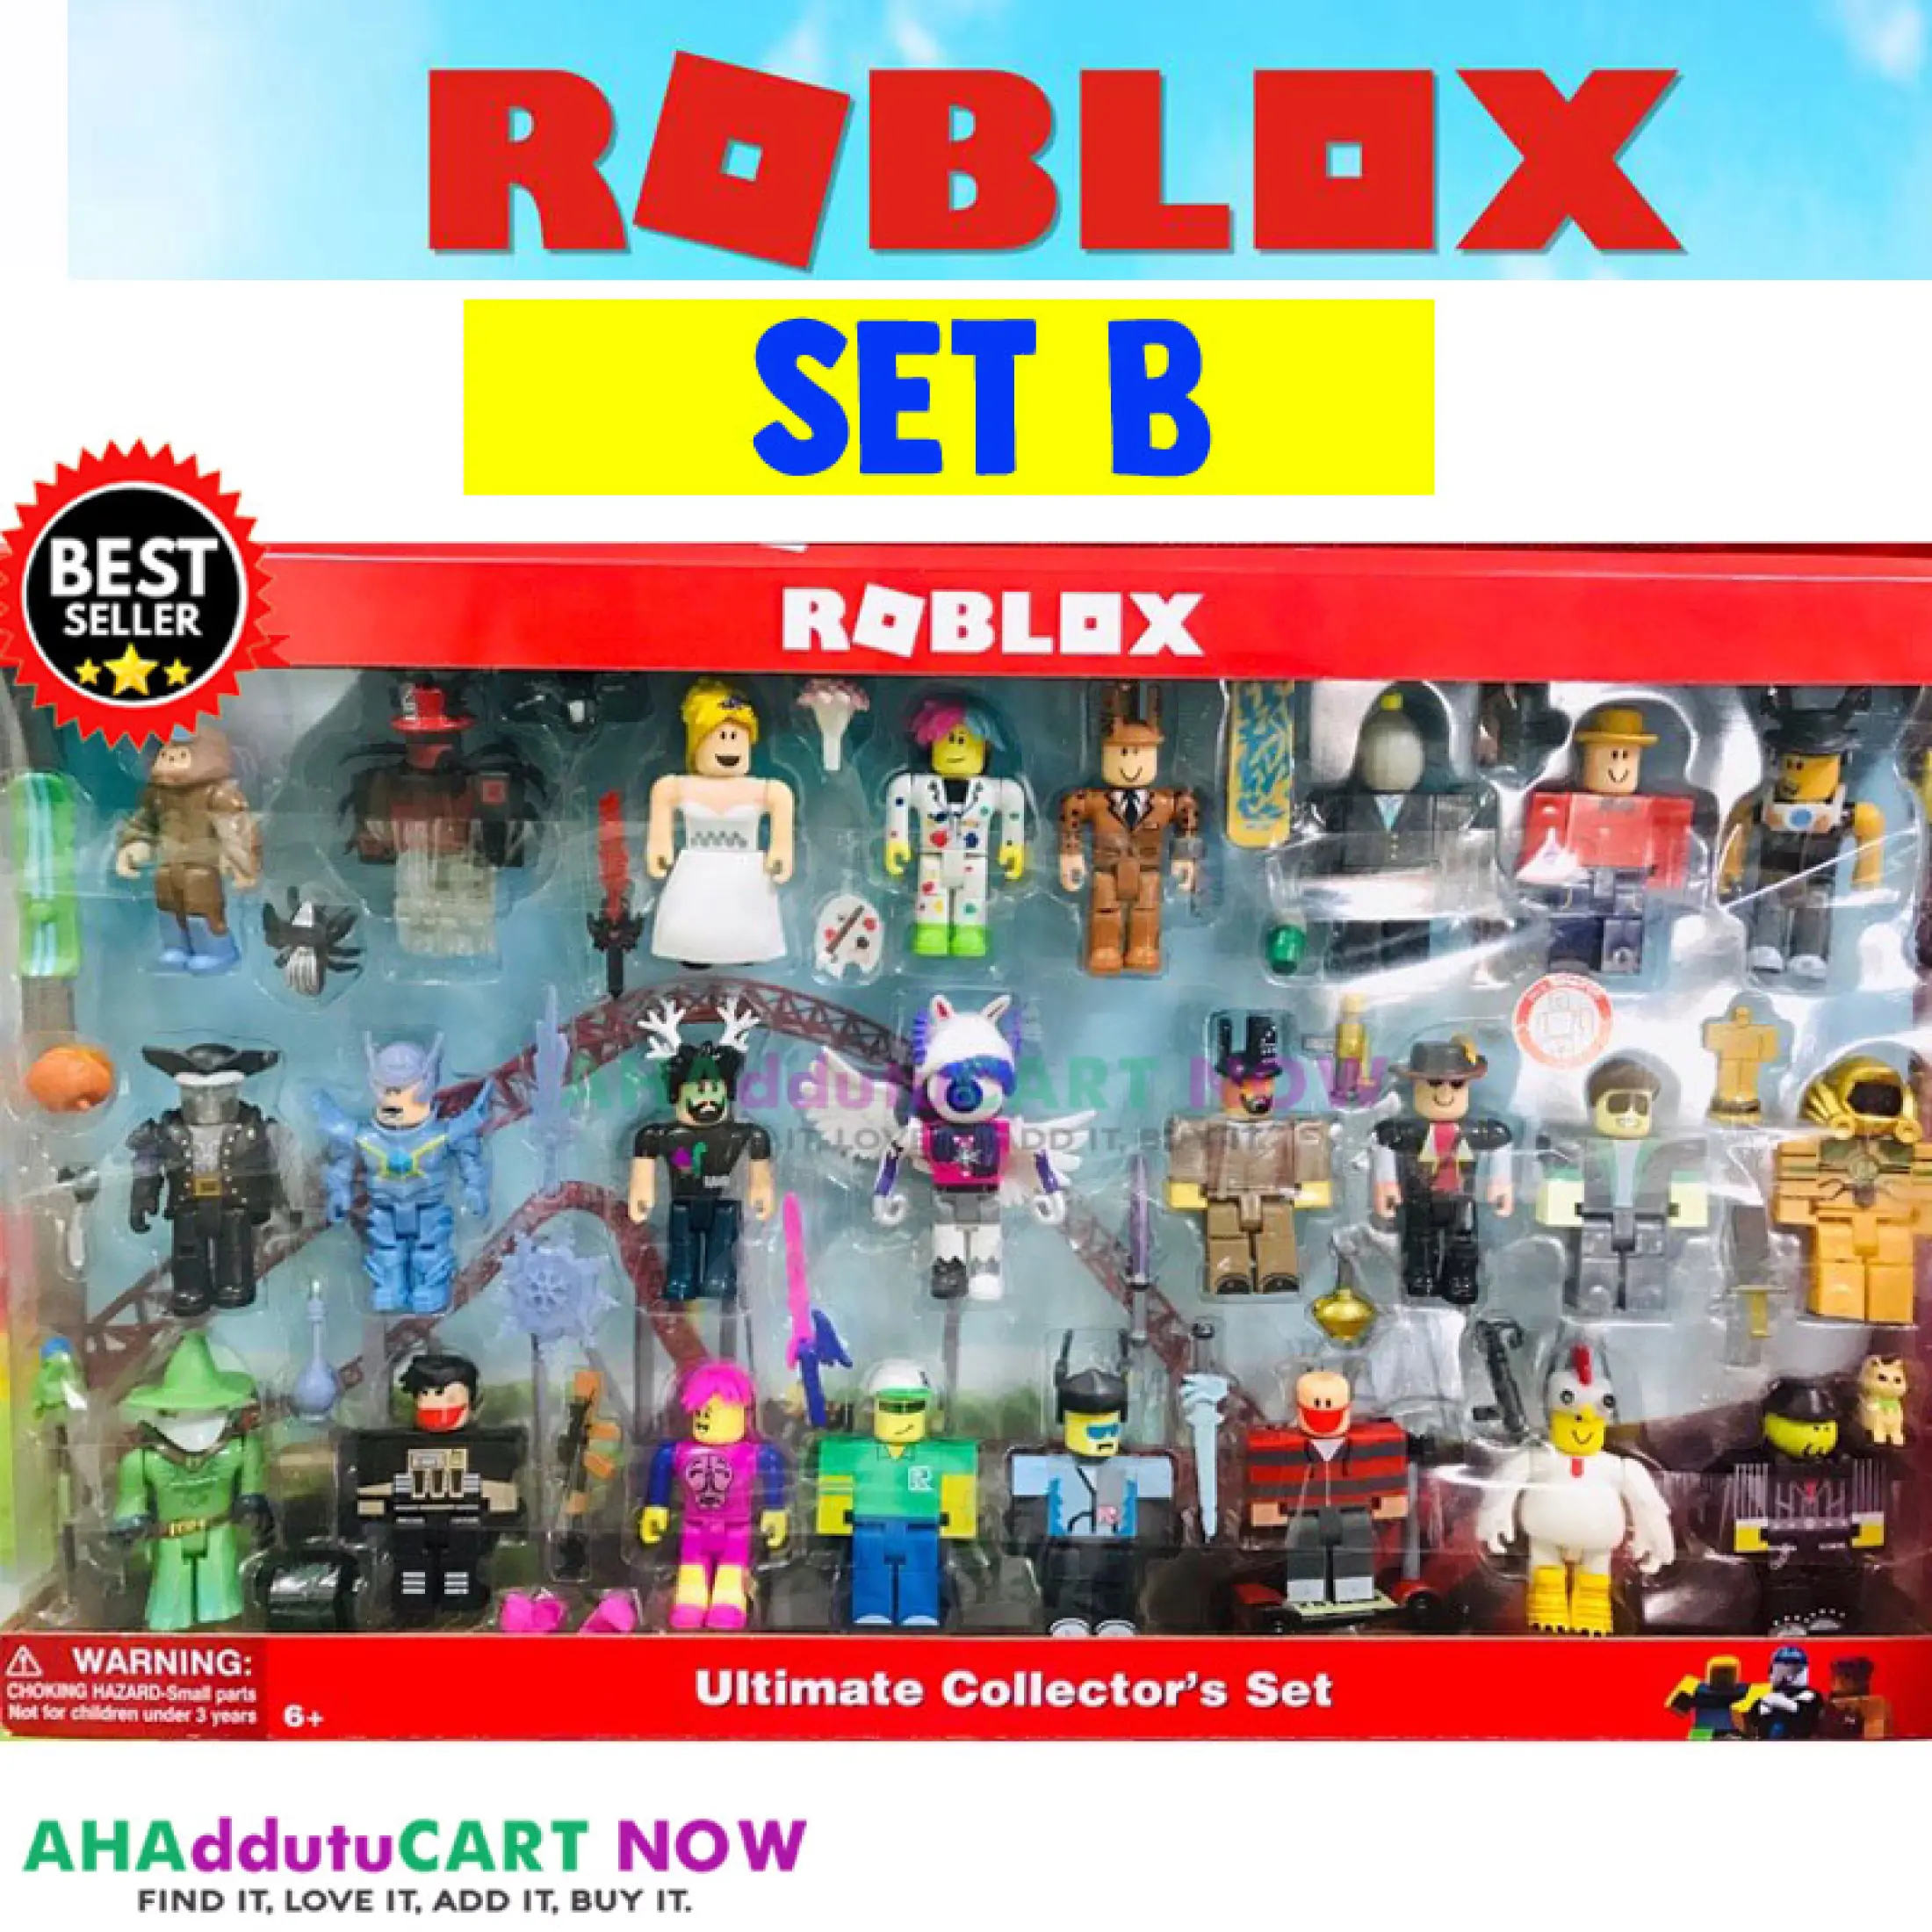 24pcs Set B Roblox Toy For Kids Boys Girls Action Characters Figures 7cm Pvc Suite Doll Toys Anime Model Figurines For Decoration Collection Christmas Birthday Gift For Kids Roblox Game Character Ultimate Mix Match Set - roblox toys for kids